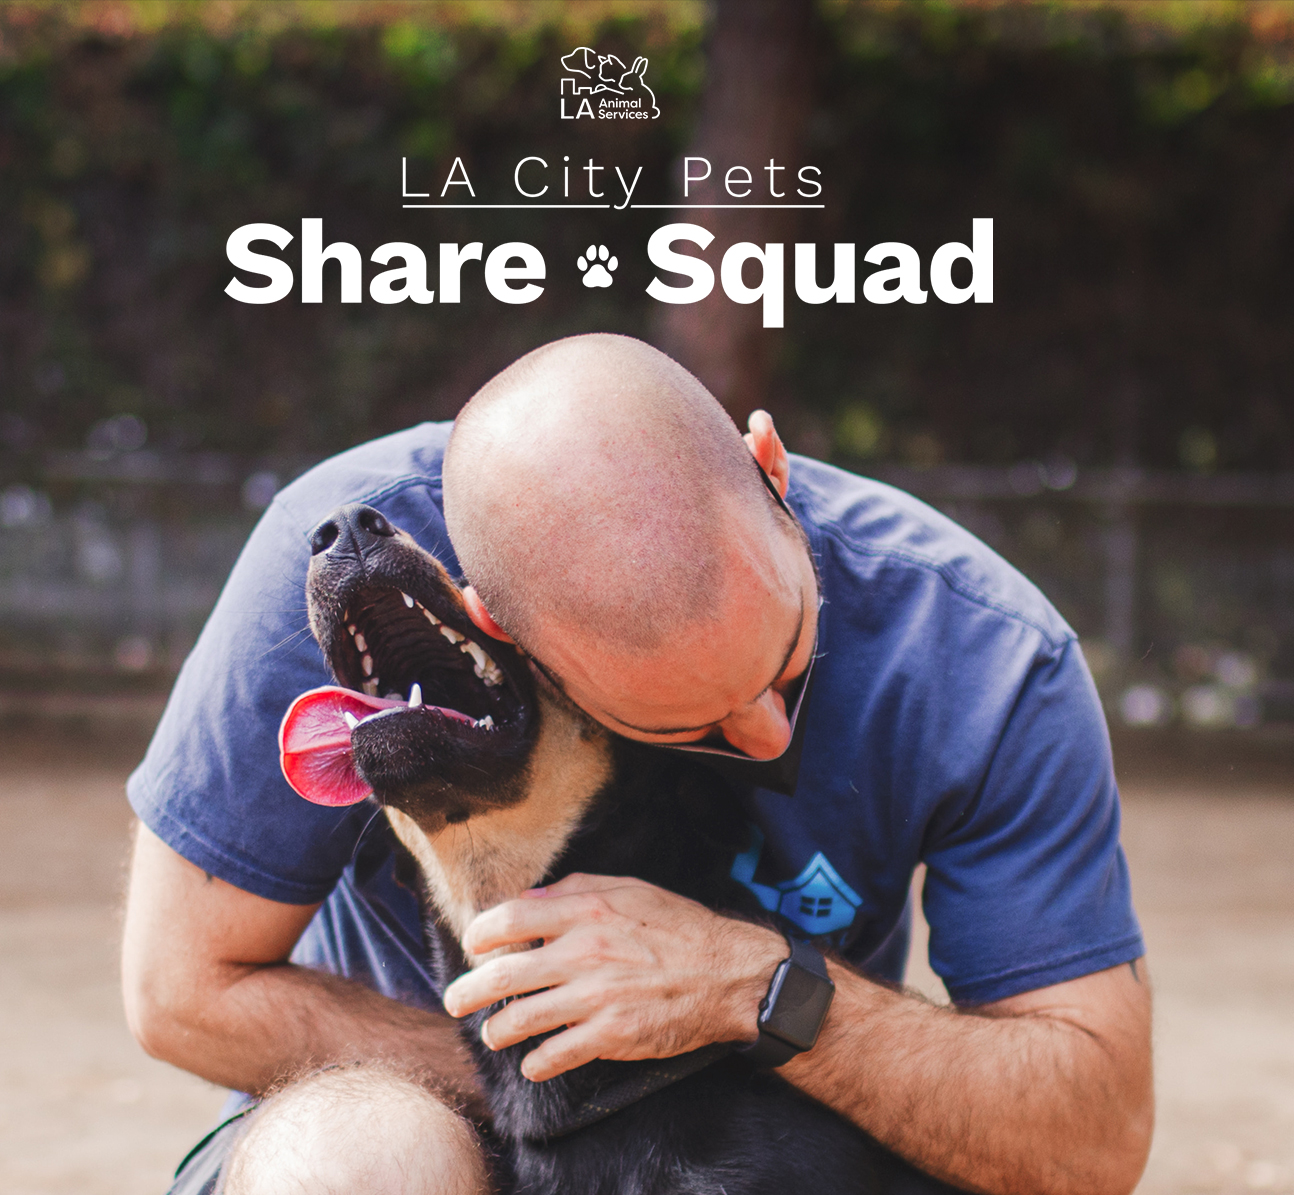 Los Angeles Animal Services promotes and protects the health, safety and  welfare of animals and people.